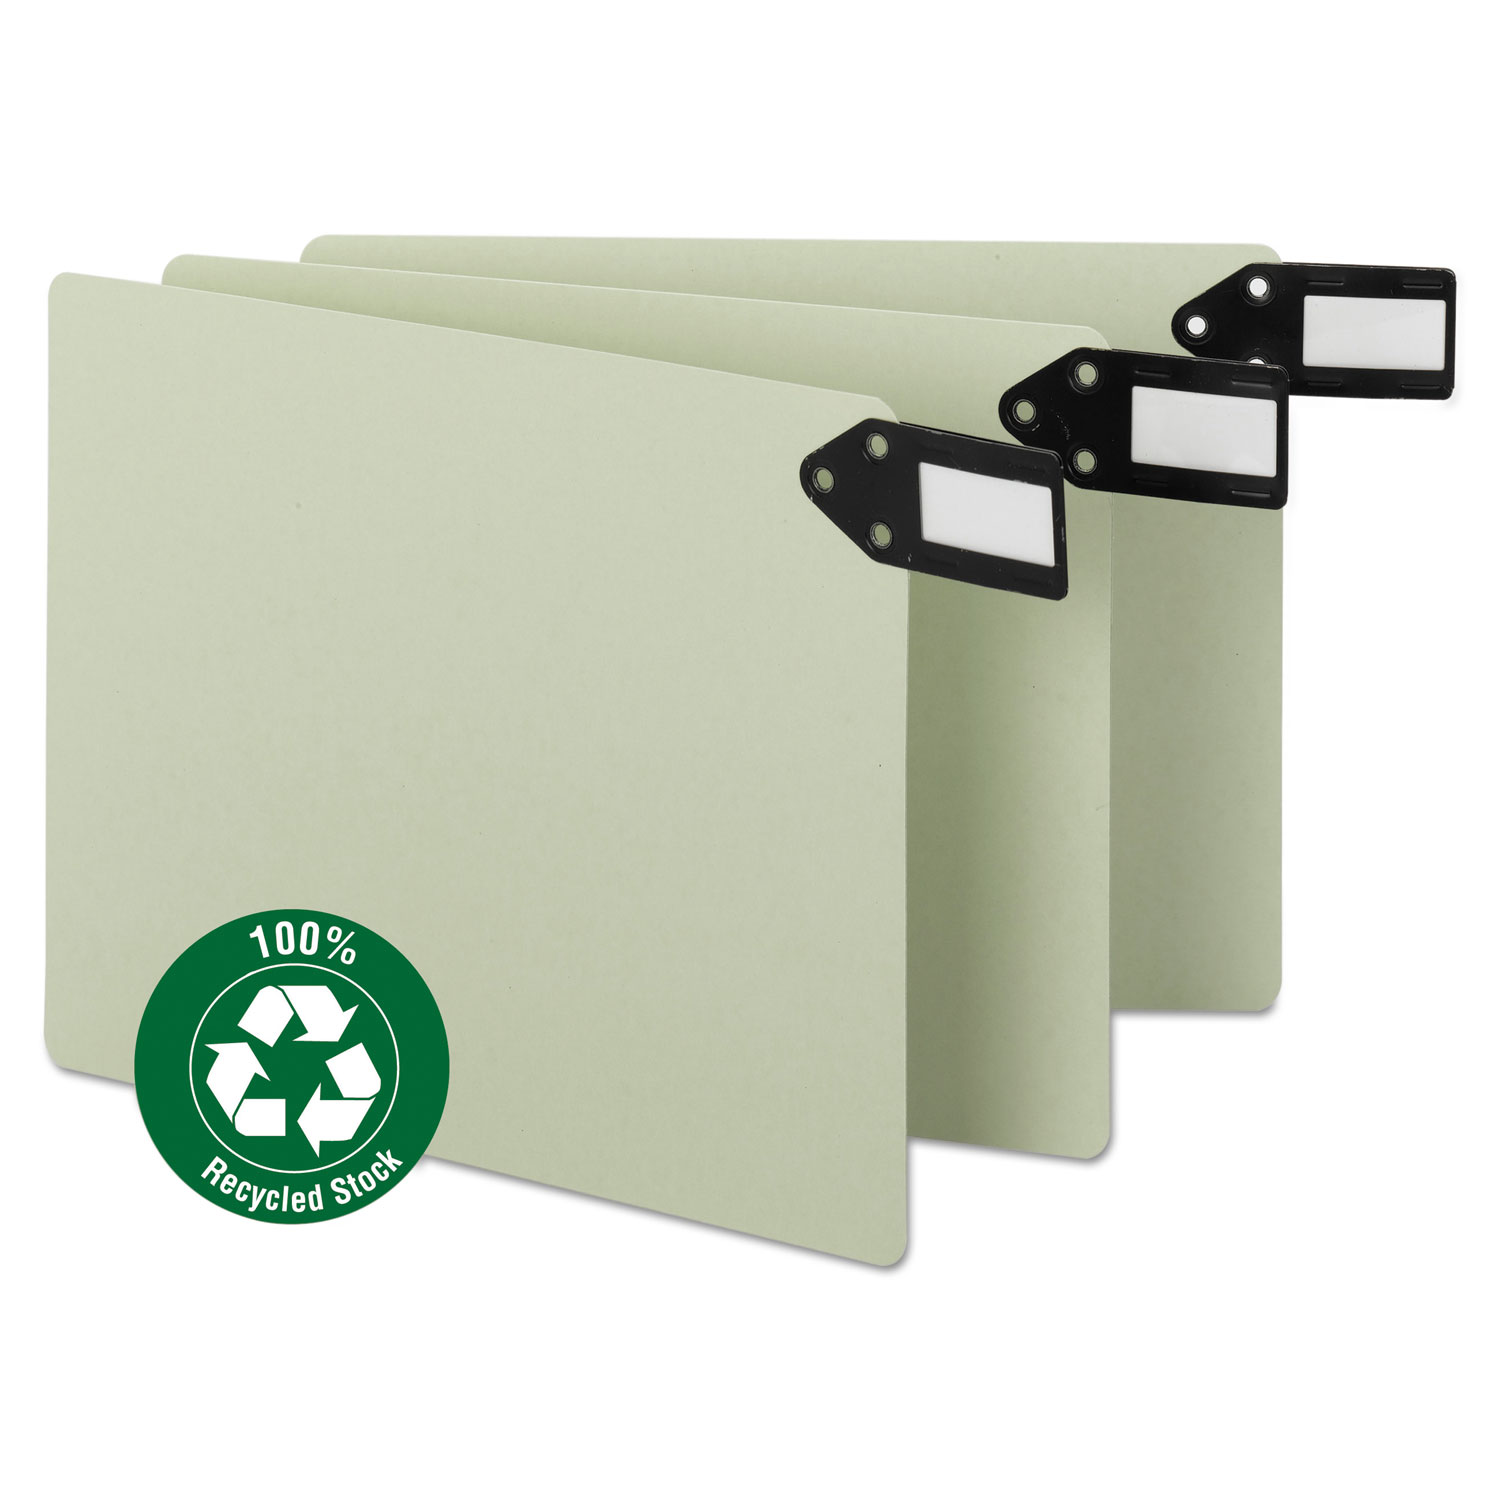  Smead 61757 100% Recycled End Tab Pressboard Guides with Metal Tabs, 1/3-Cut End Tab, Blank, 8.5 x 11, Green, 50/Box (SMD61757) 